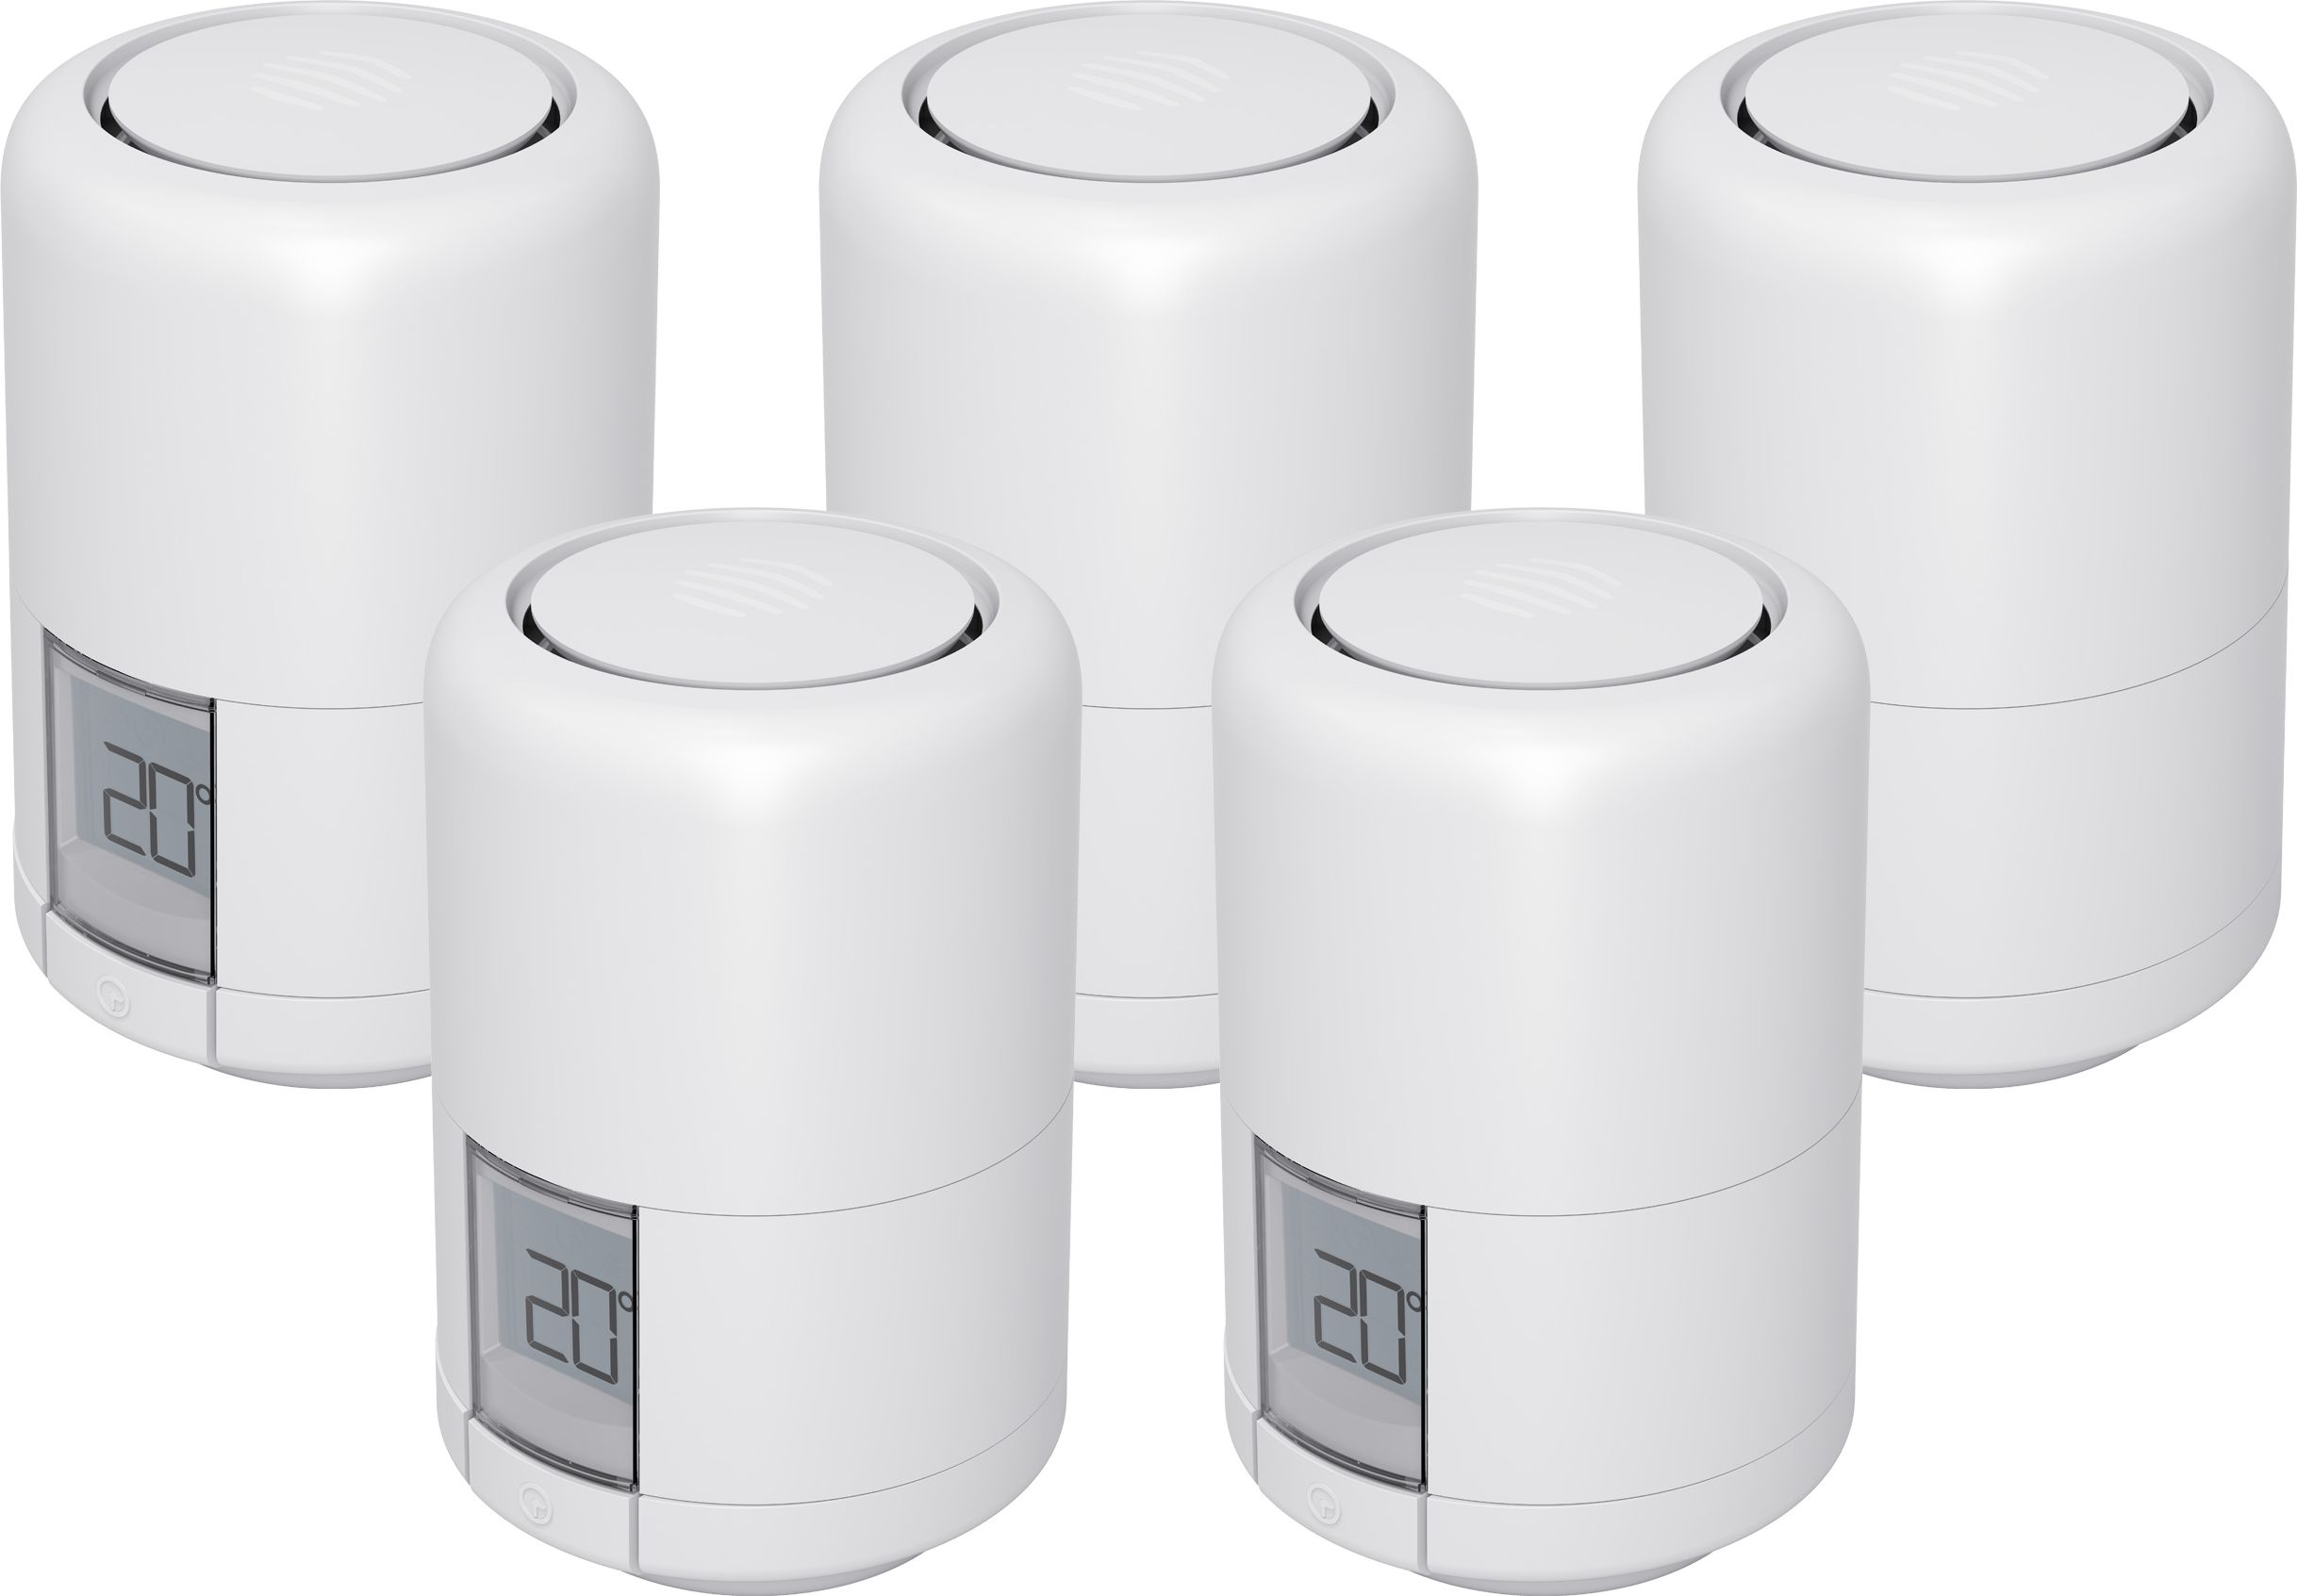 Hive Smart Radiator Thermostat 5 Pack (15mm Head Only) - Self install, White